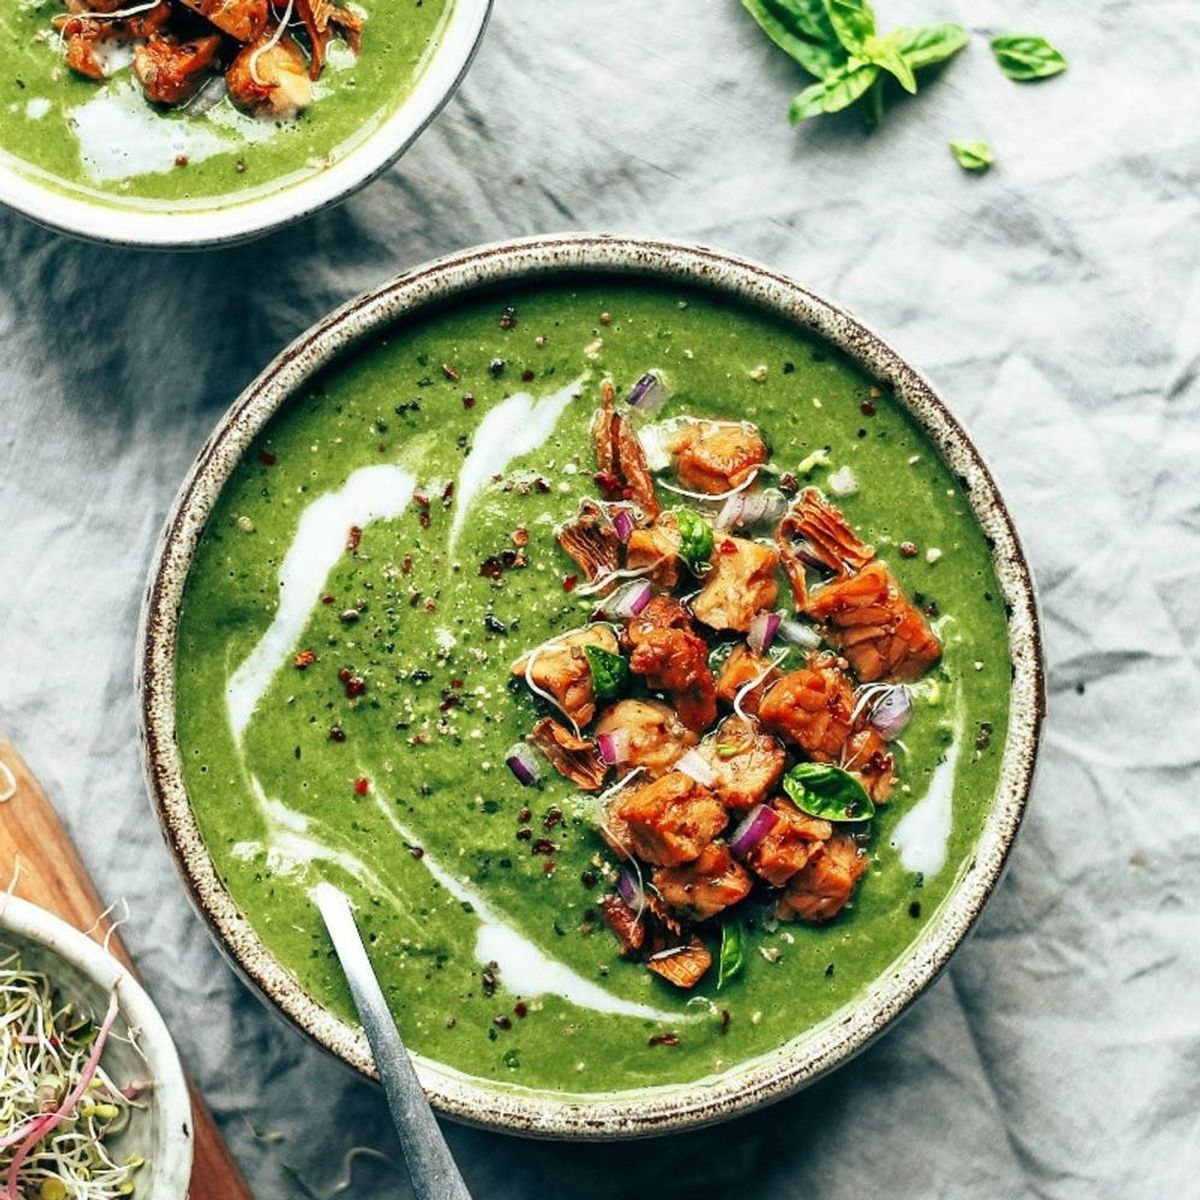 Attention Vegans: Fill Up on These 12 Protein-Rich Meals